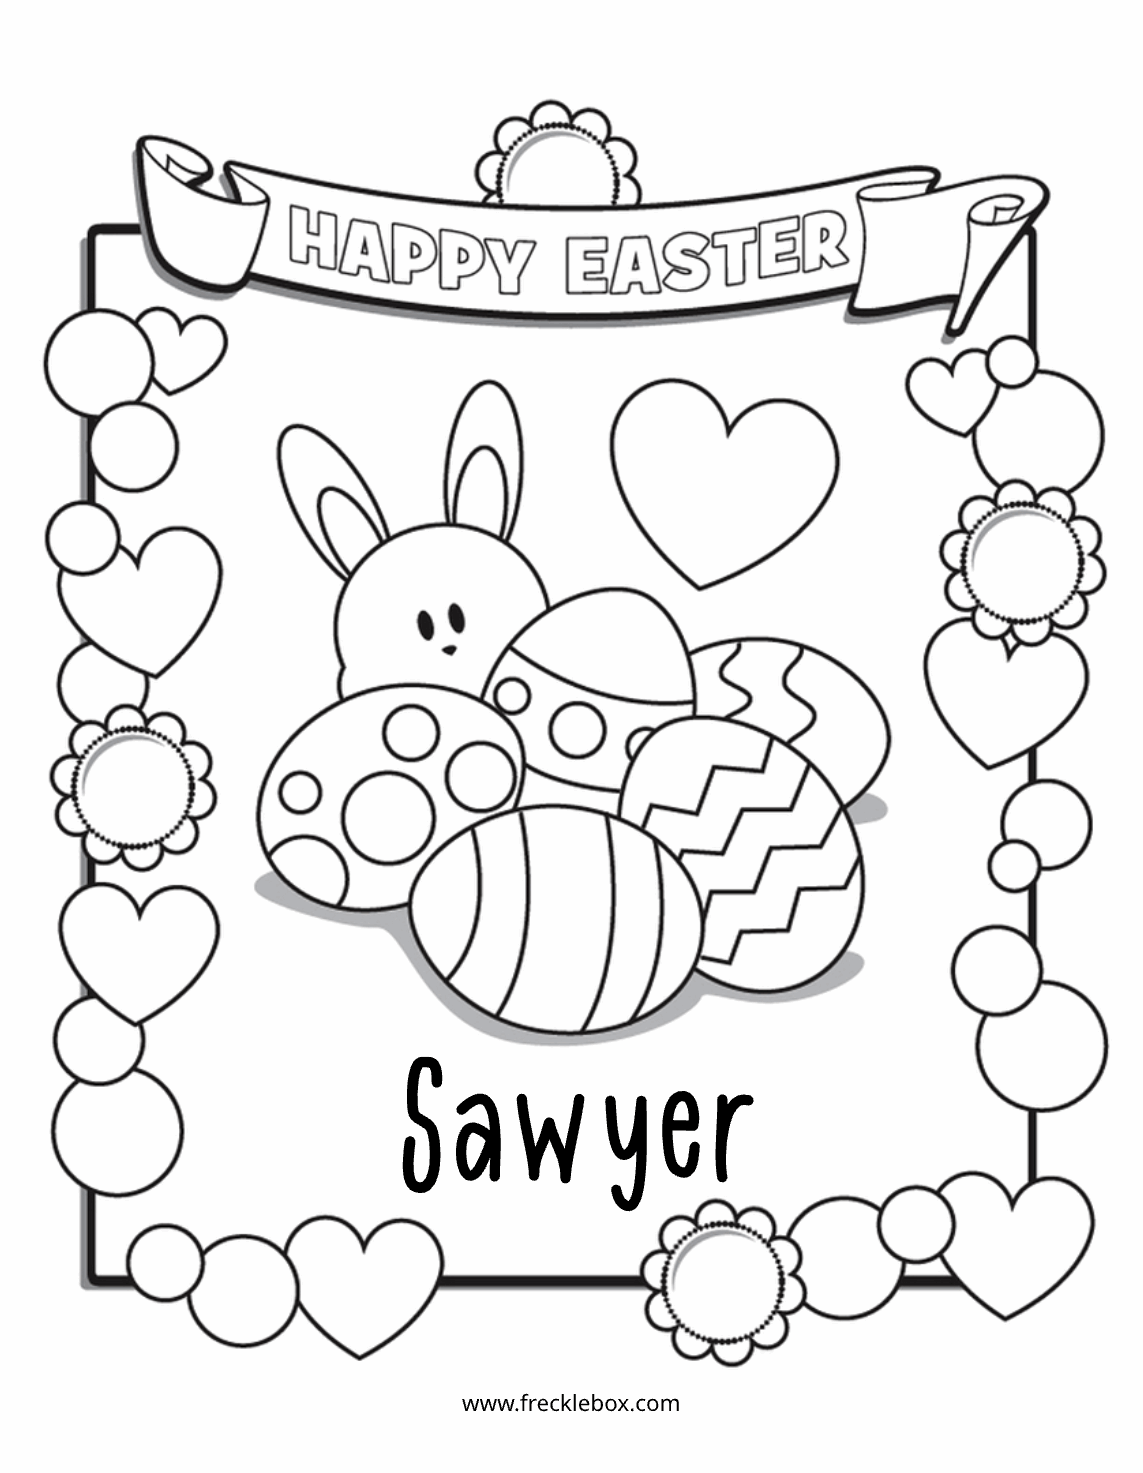 Free personalized coloring page with Easter bunny and eggs.